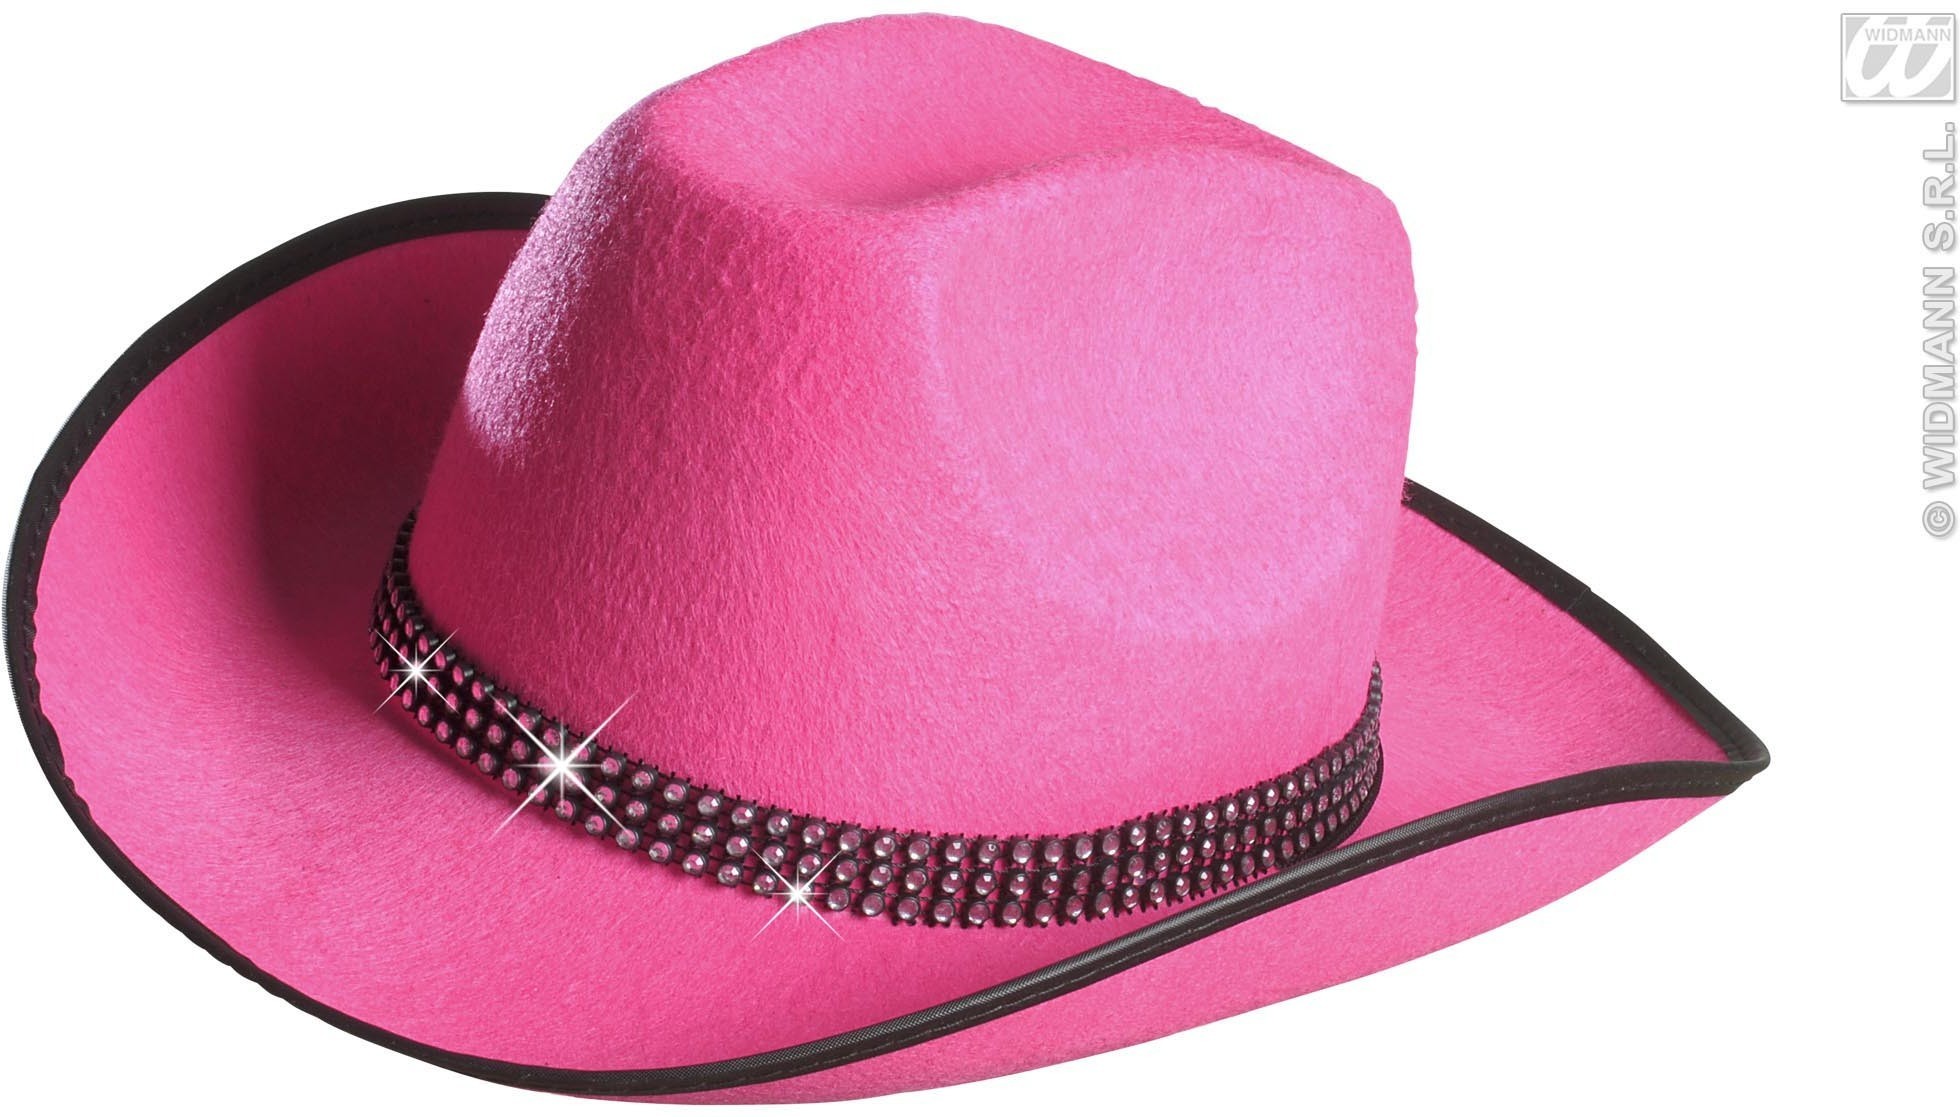 Picture Of Hat